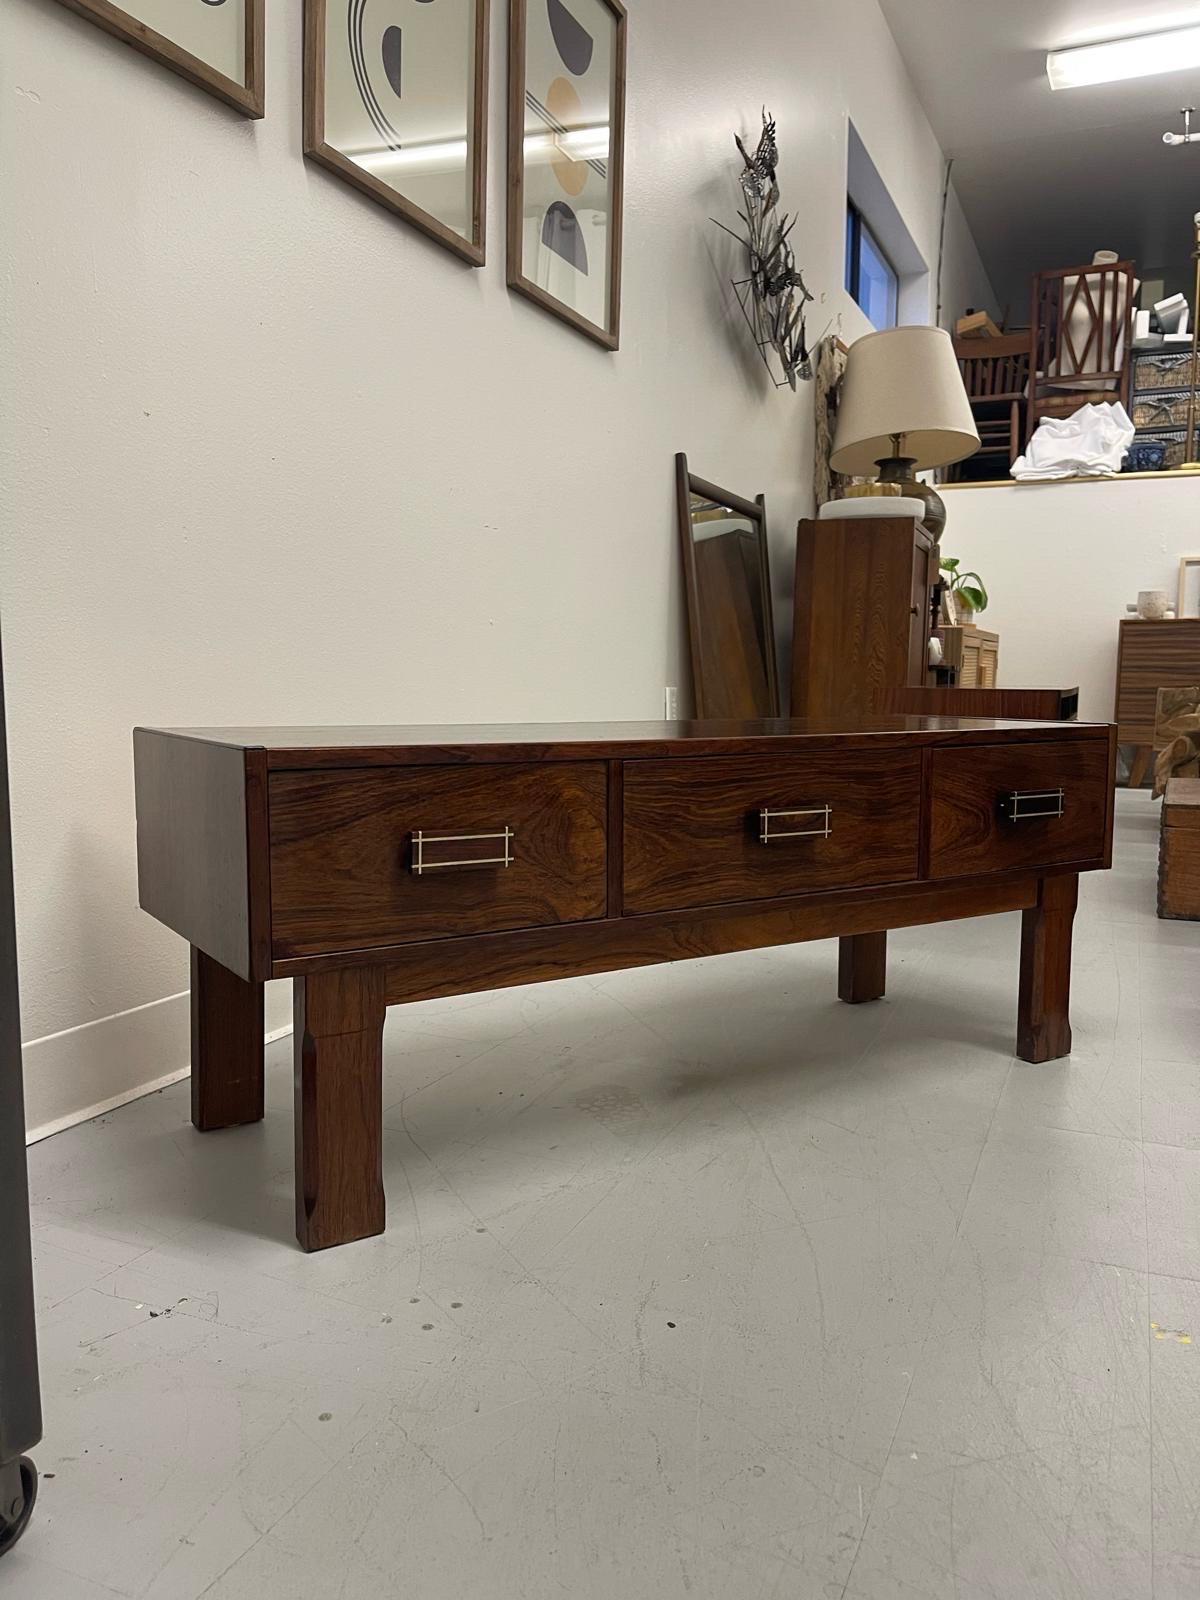 Imported Vintage Danish Modern Rosewood Low Console Coffee Table with wood inlay In Good Condition For Sale In Seattle, WA